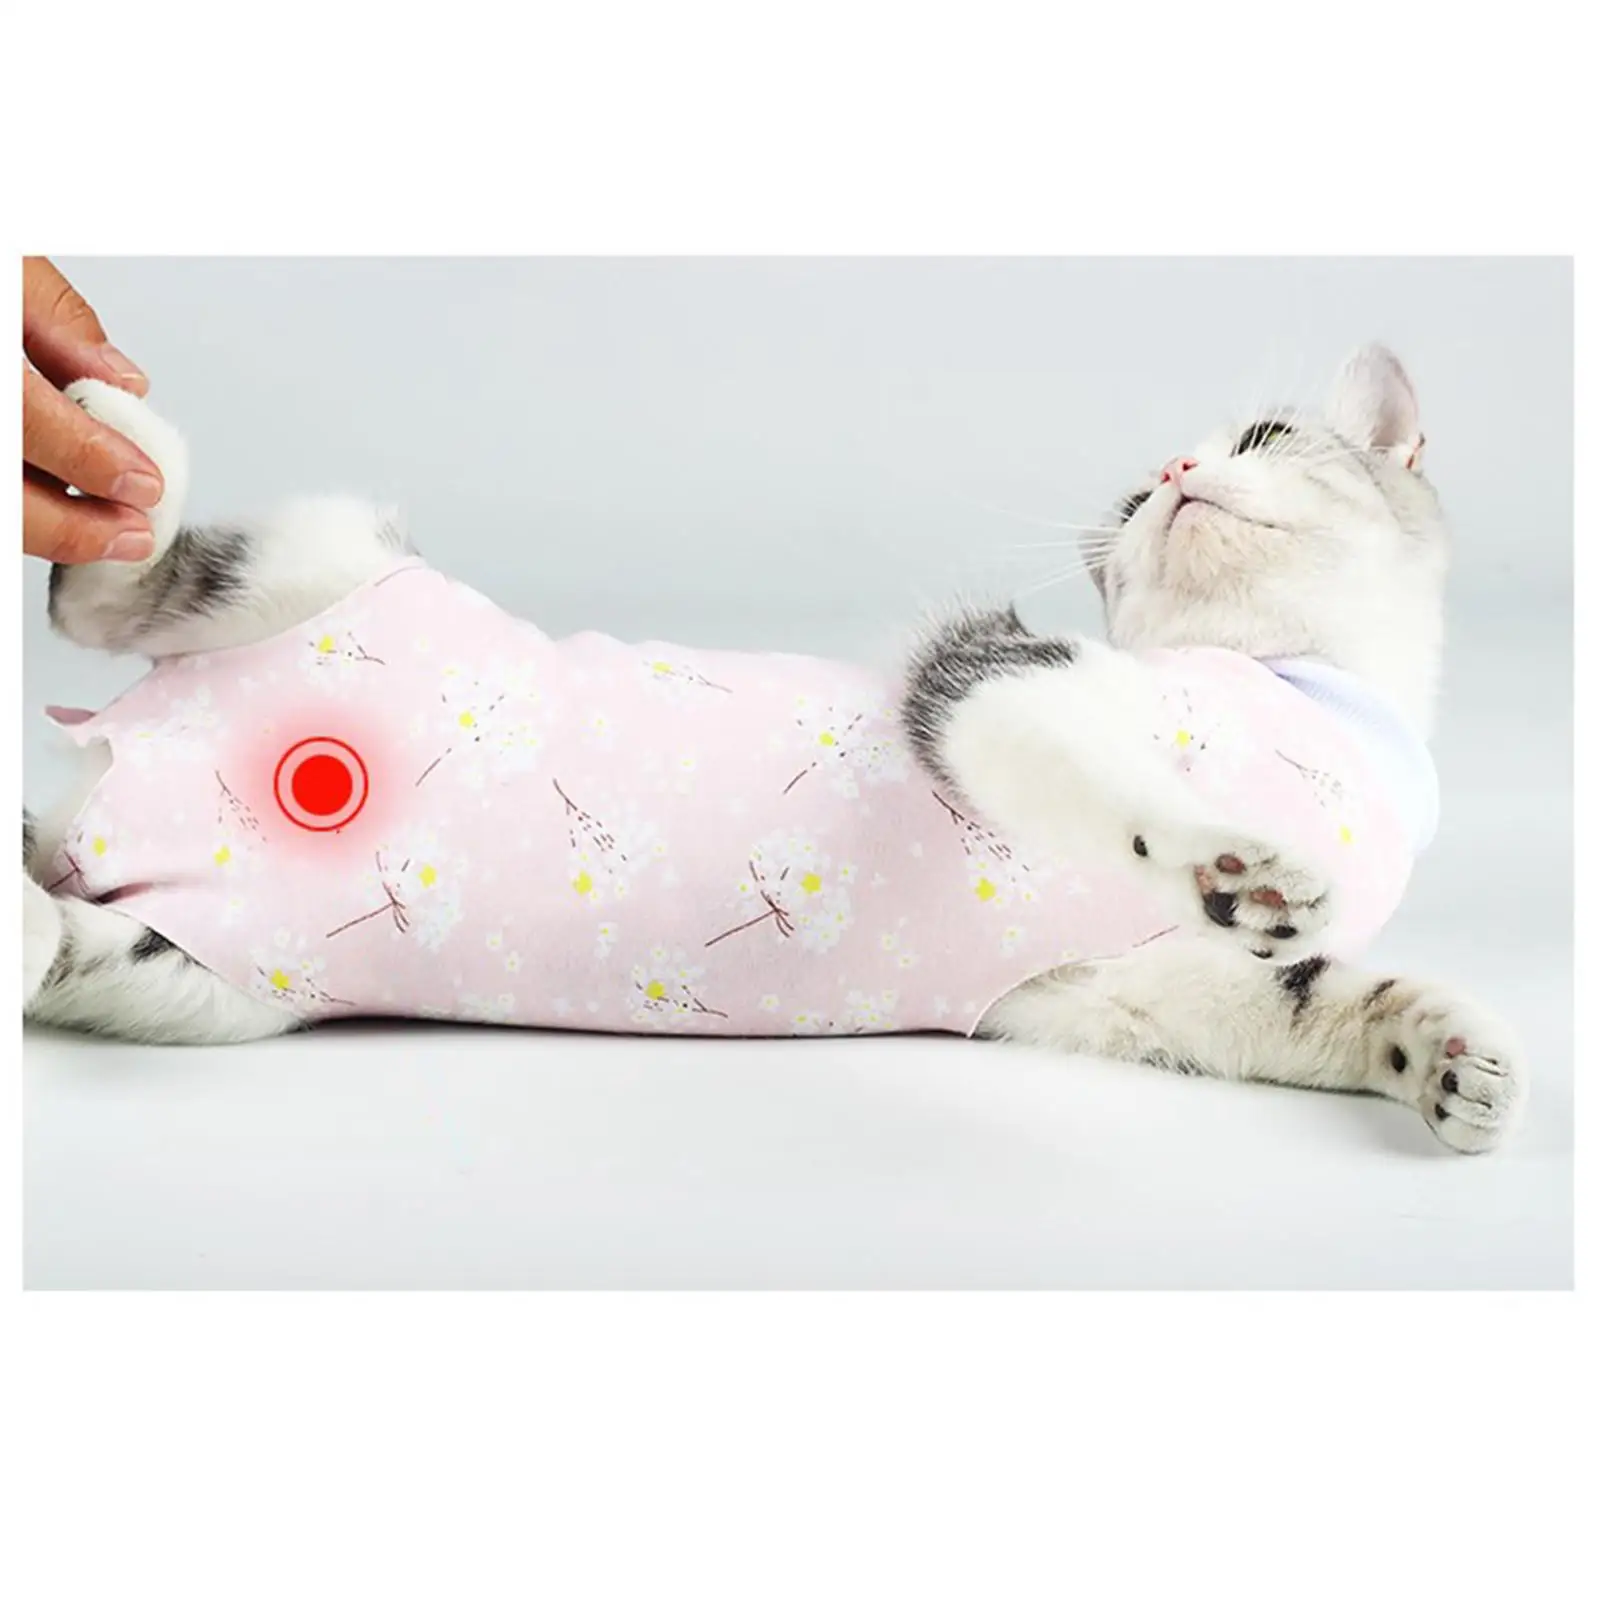 Cat Recovery Suit Clothes Professional Vest Breathable Soft for Skin Abdominal Wounds After Surgery Puppy Home